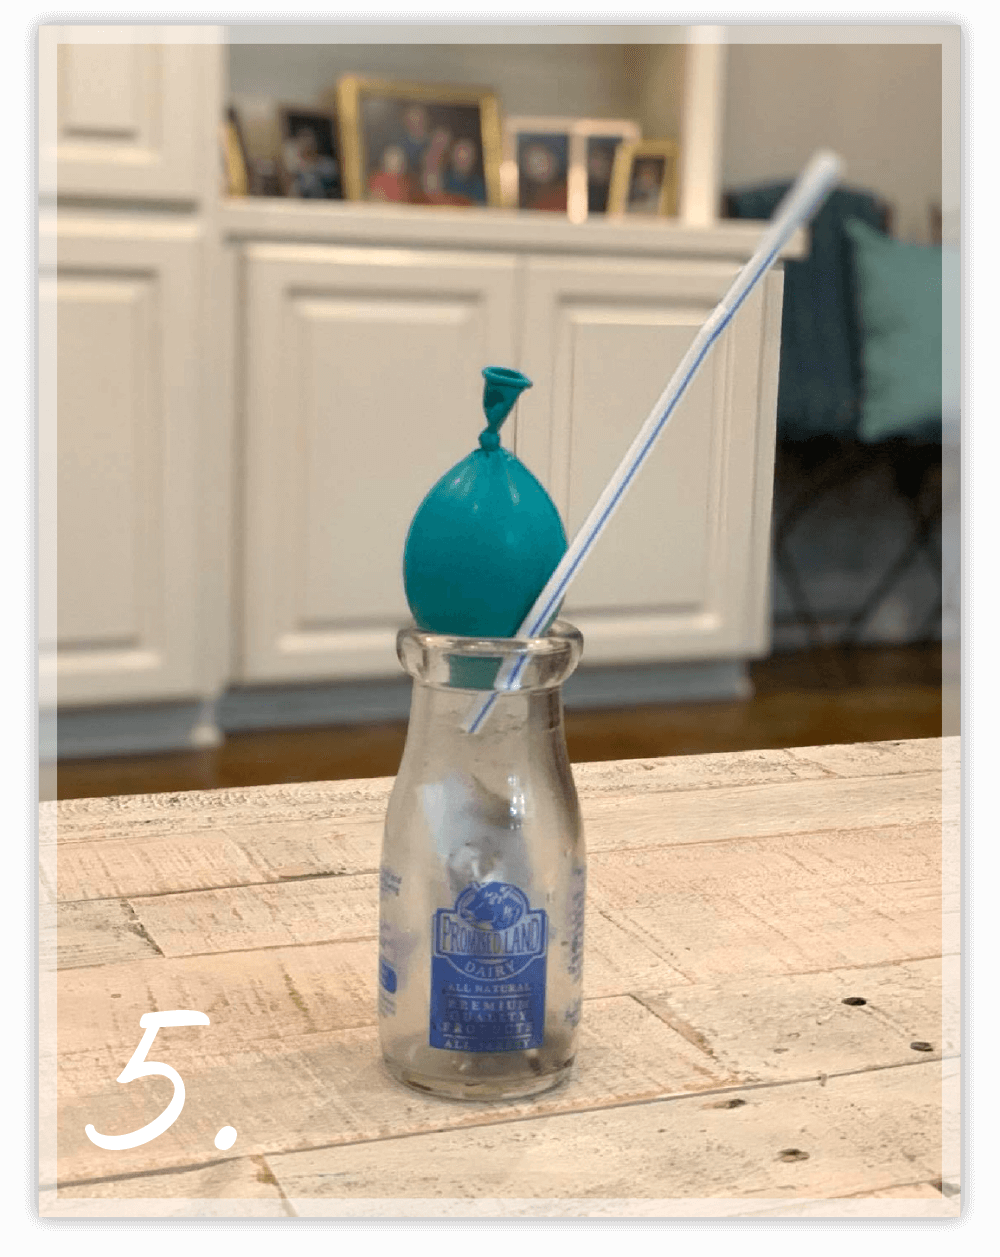 Balloon on a glass bottle with a straw sticking out of the bottle